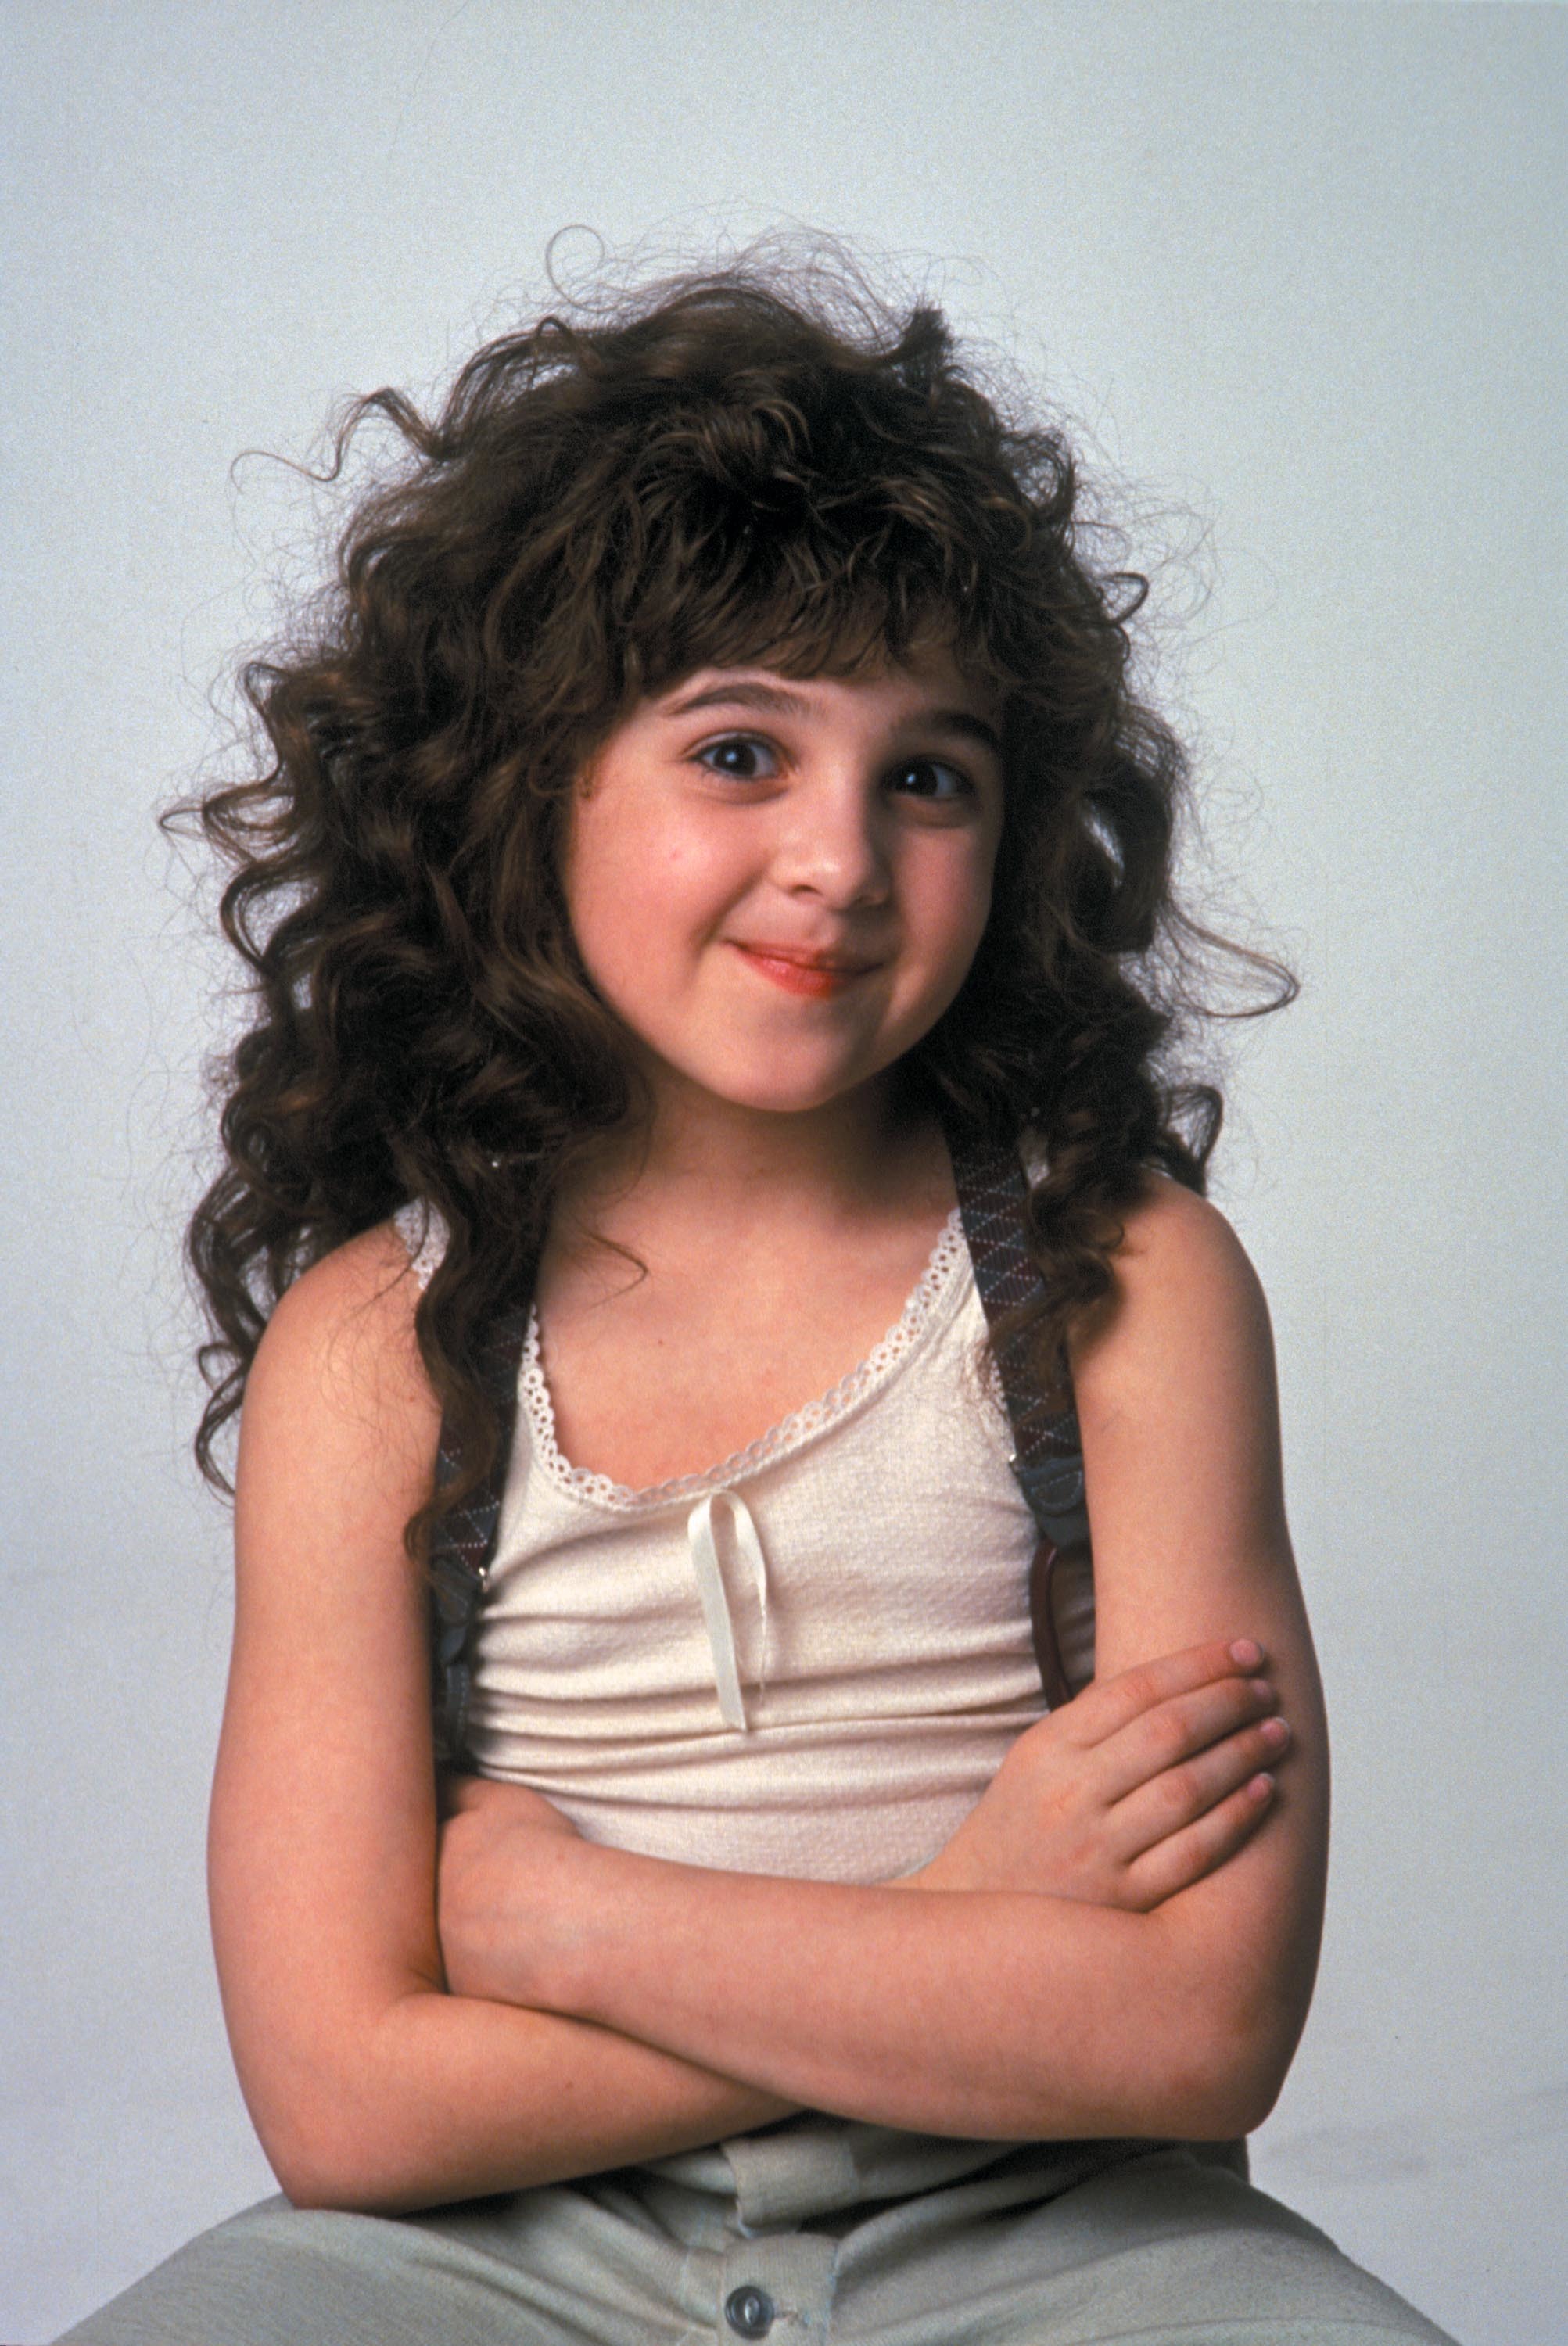 <p>Alisan Porter first gained notoriety in 1987 on Ed McMahon's "Star Search" when she became the youngest contestant to win the competition. Of course Hollywood came knocking, and she was cast in the title role in John Hughes' 1991 film "Curly Sue," in which she went toe-to-toe with James Belushi.</p>